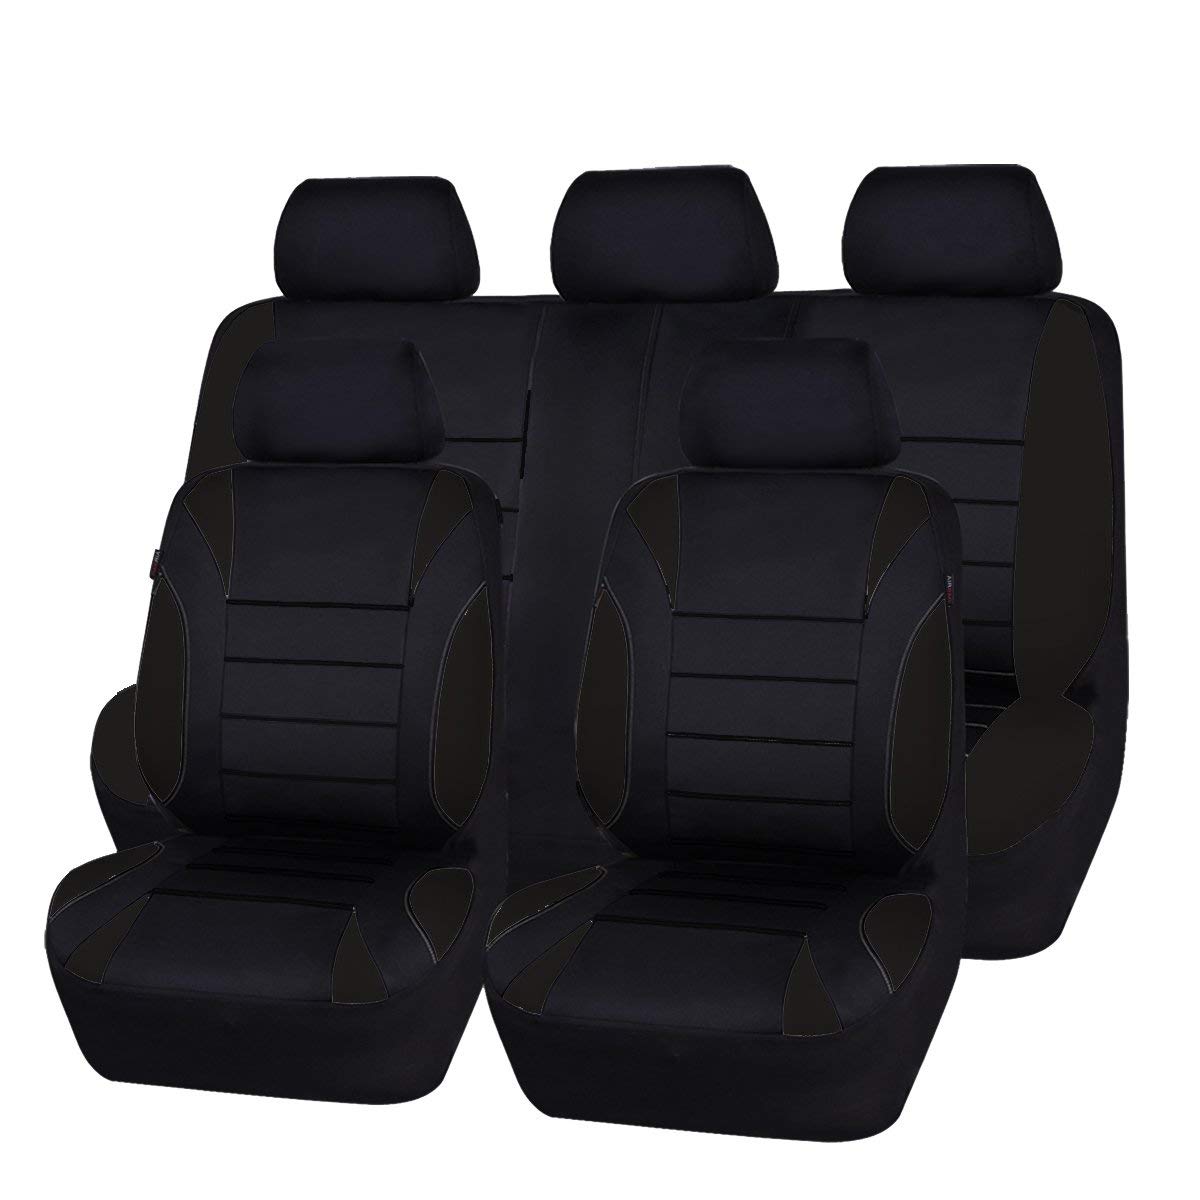 CAR PASS NEW ARRIVAL Waterproof Neoprene 11 Piece Universal Fit Car Seat Cover